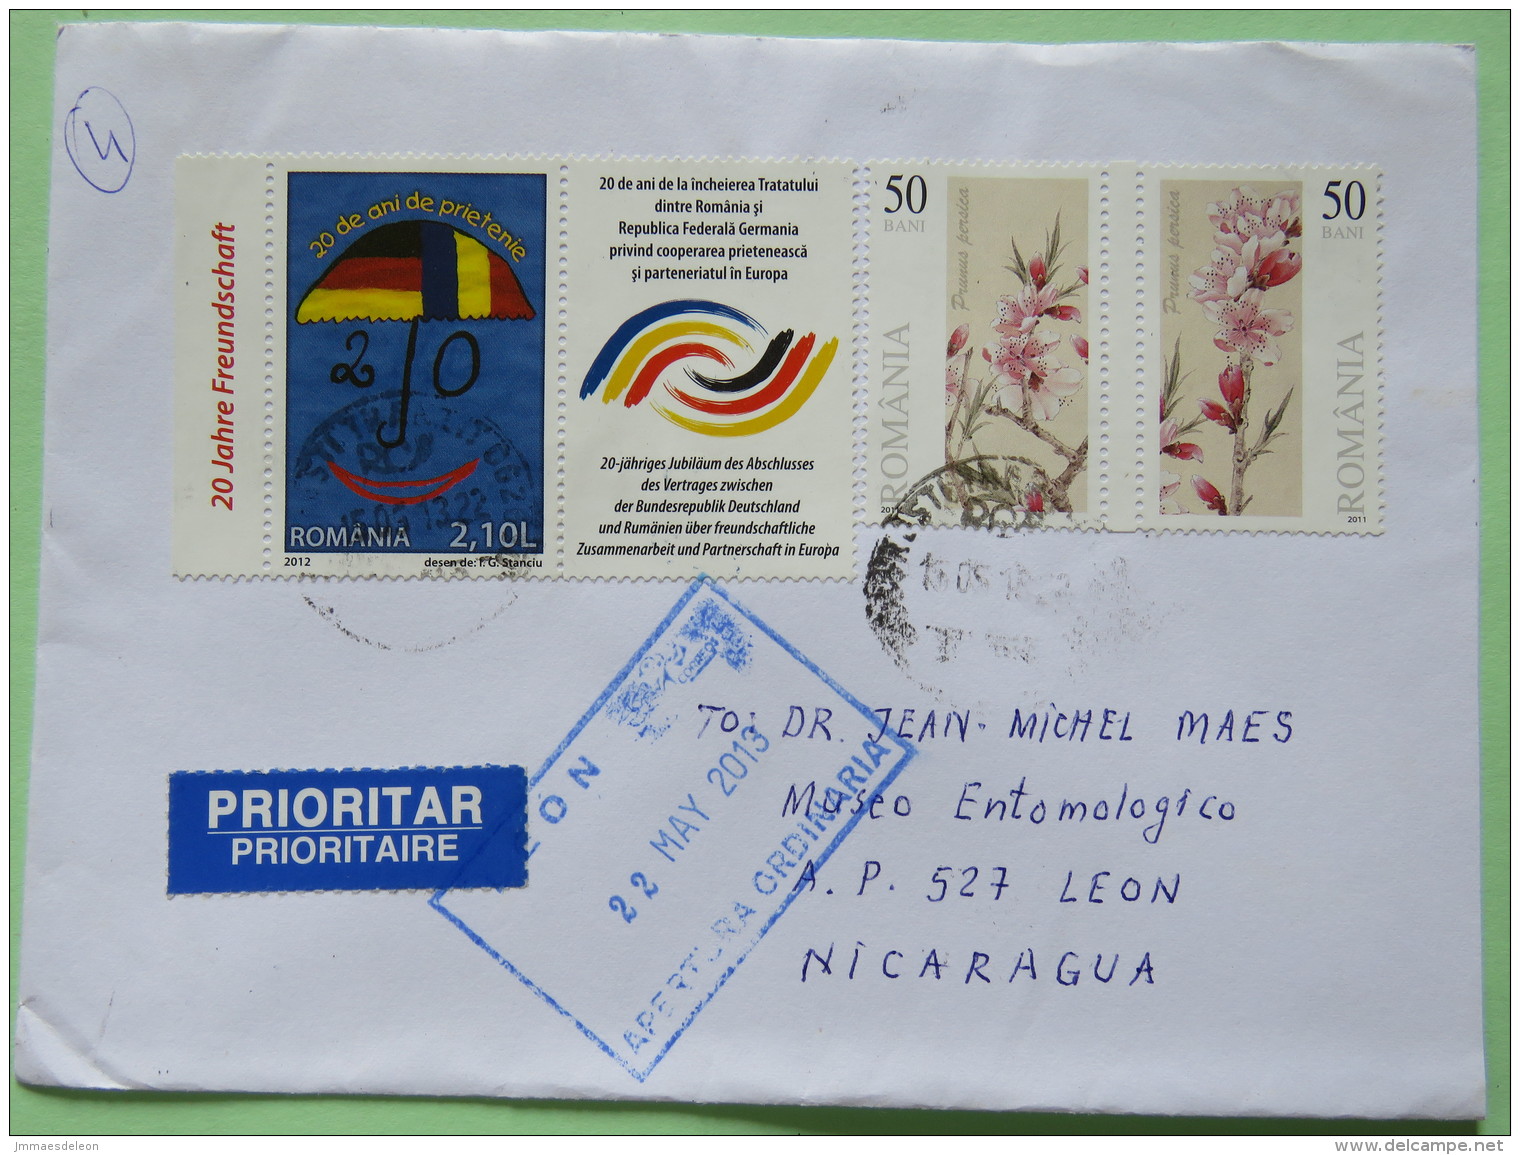 Romania 2013 Cover Bucharest To Nicaragua - Flowers - Flags Romania - Germany Treaty + Label - Covers & Documents